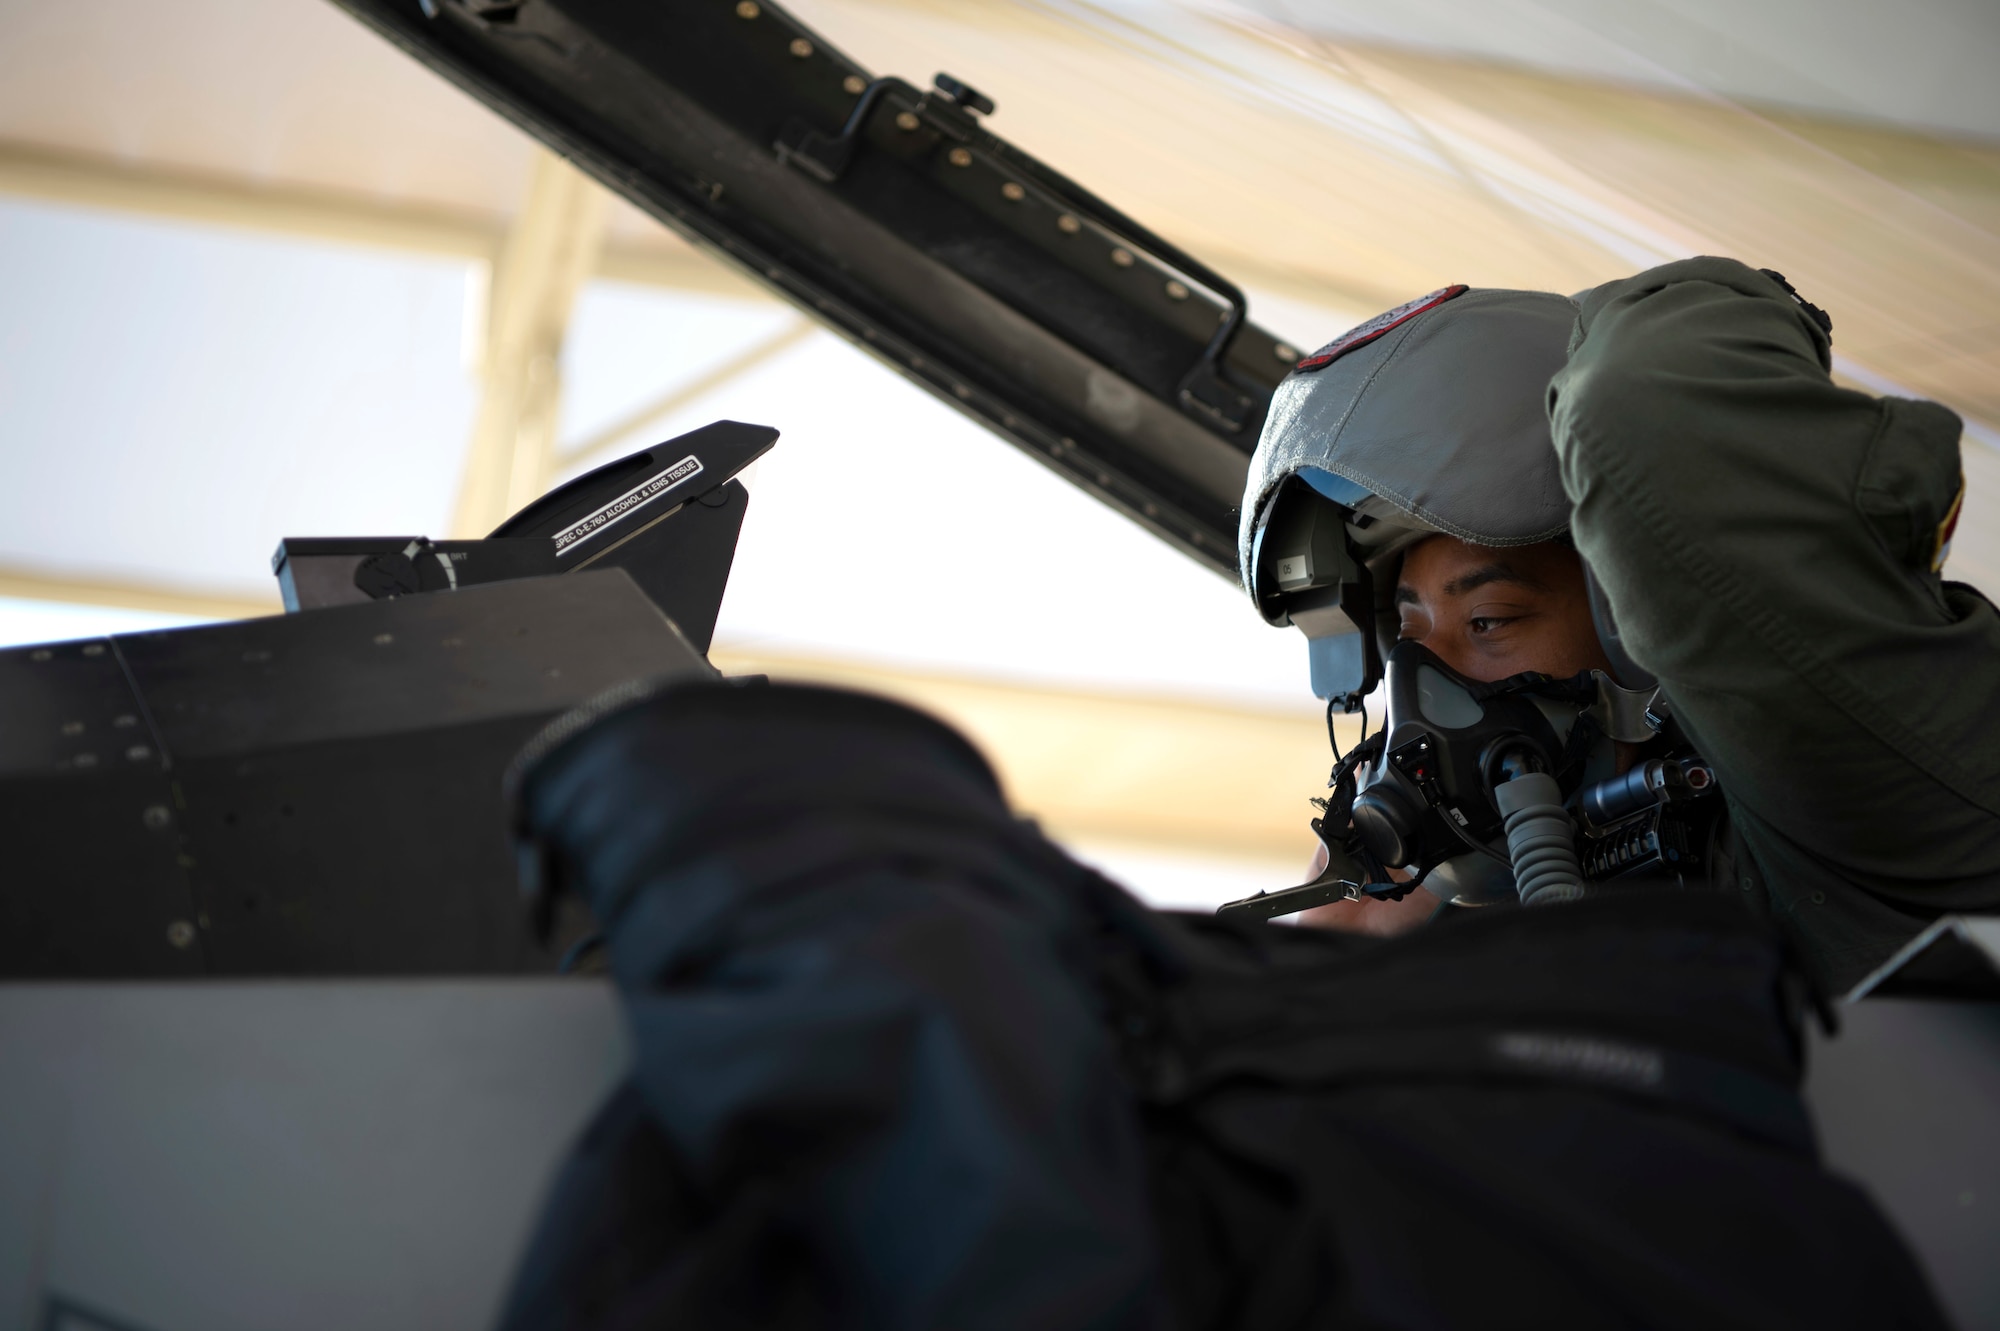 First Lt. Marcus Ward, a student pilot assigned to the 149th Fighter Wing, Air National Guard, tests his face mask prior to launch during Coronet Cactus, Feb. 27, 2020, at Luke Air Force Base, Ariz. The annual training event deploys members of the 149th Fighter Wing, headquartered at Joint Base San Antonio-Lackland, Texas, to another environment in order to familiarize them with accomplishing mission objectives in an unfamiliar location. (Air National Guard photo by Staff Sgt. Derek Davis)